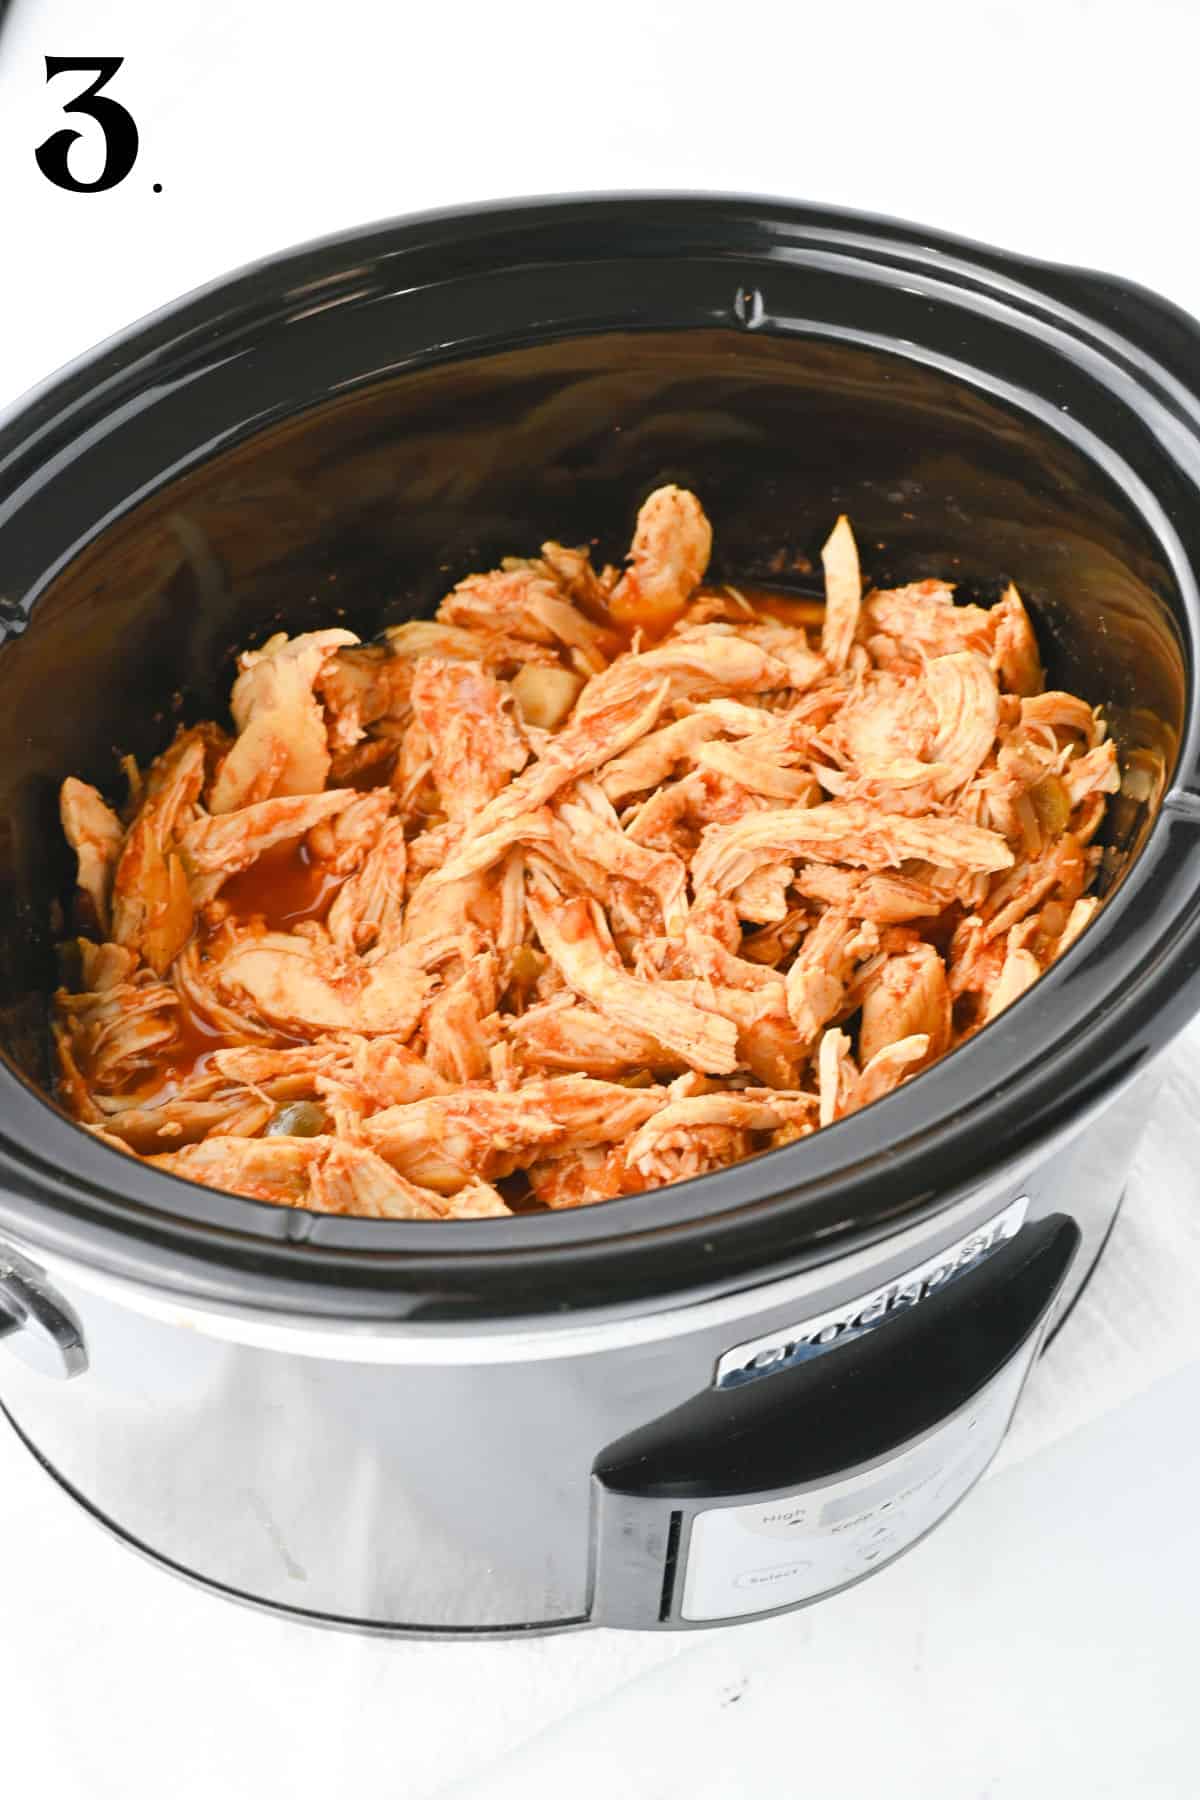 How to Make 3 Ingredient Crock Pot Chicken Tacos with sides shred chicken.